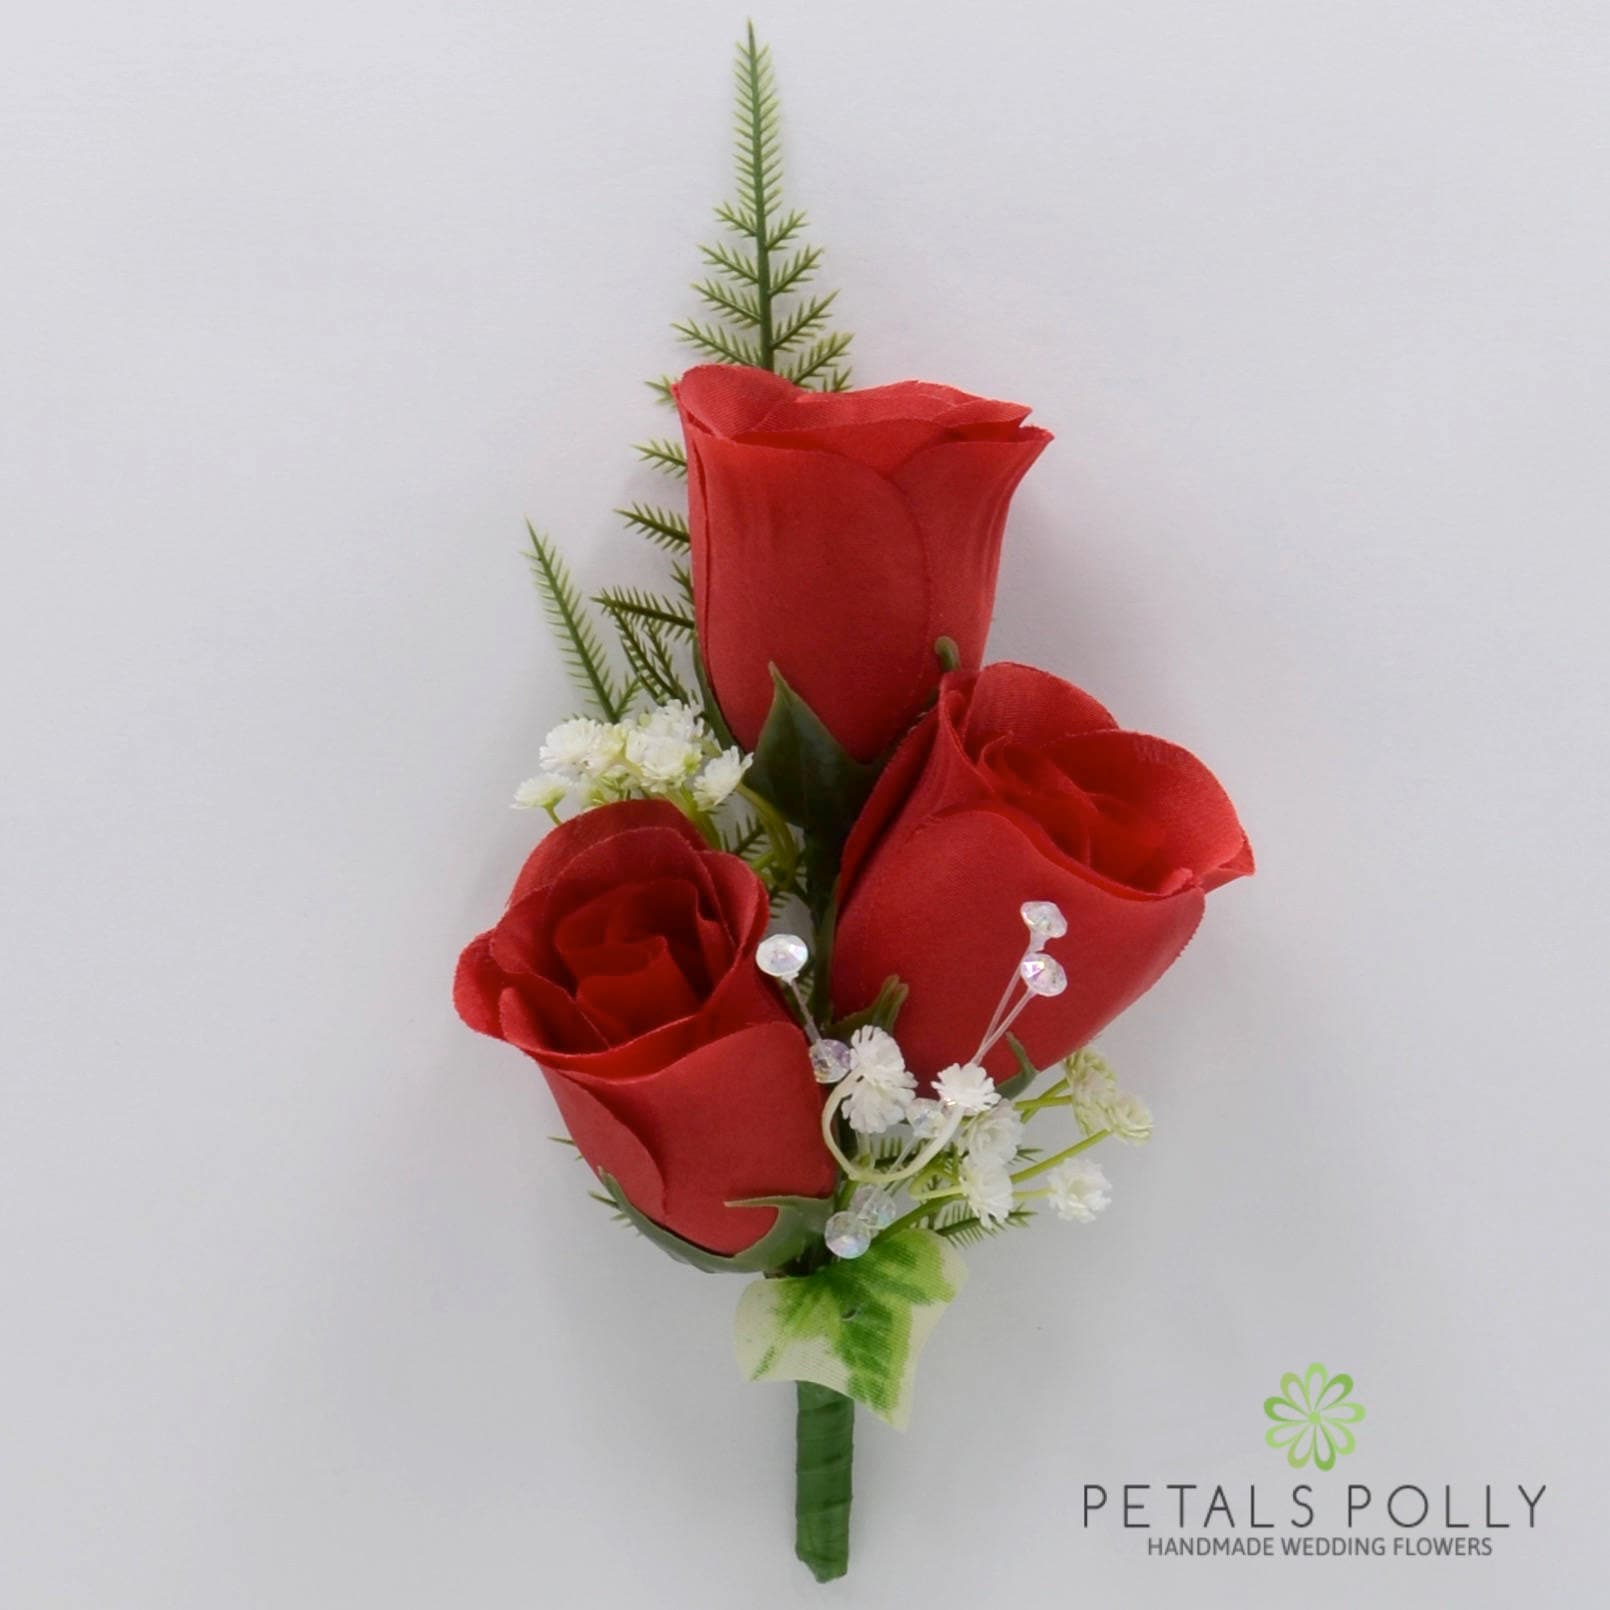 3 x Artificial Red Rose Buttonhole Corsage 